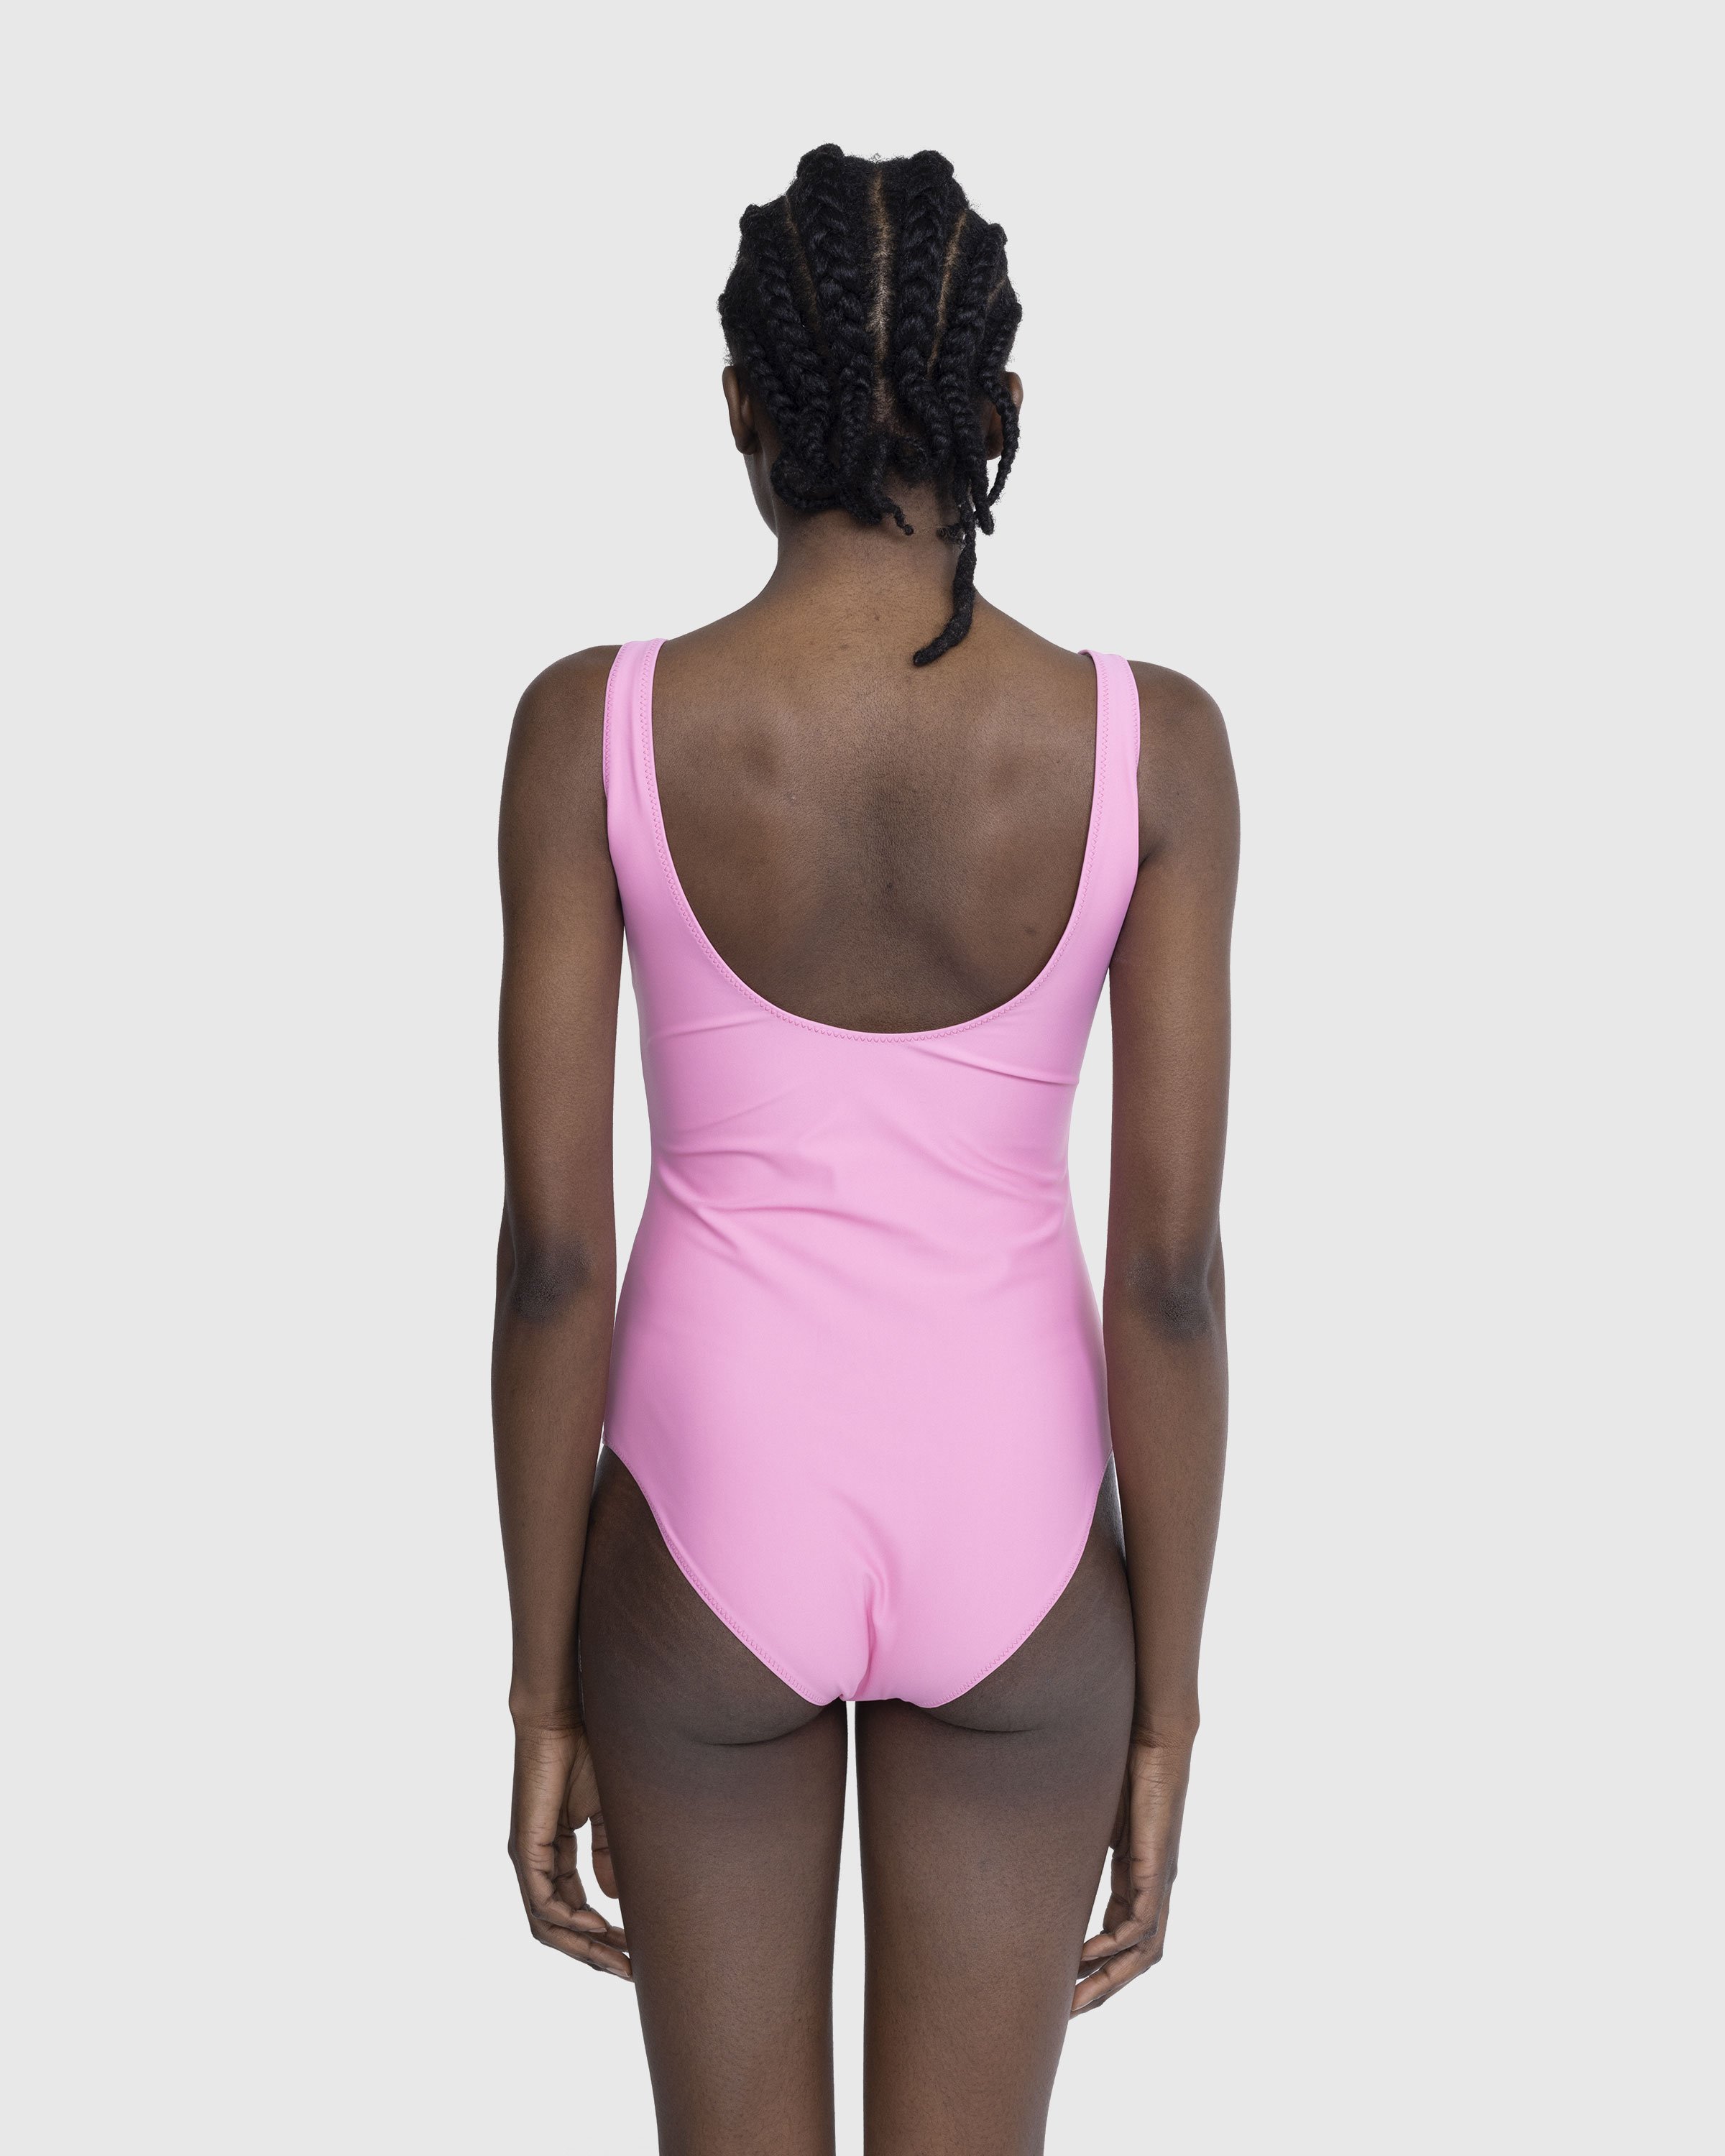 Stockholm Surfboard Club - Swimsuit Pink - Clothing - Multi - Image 3